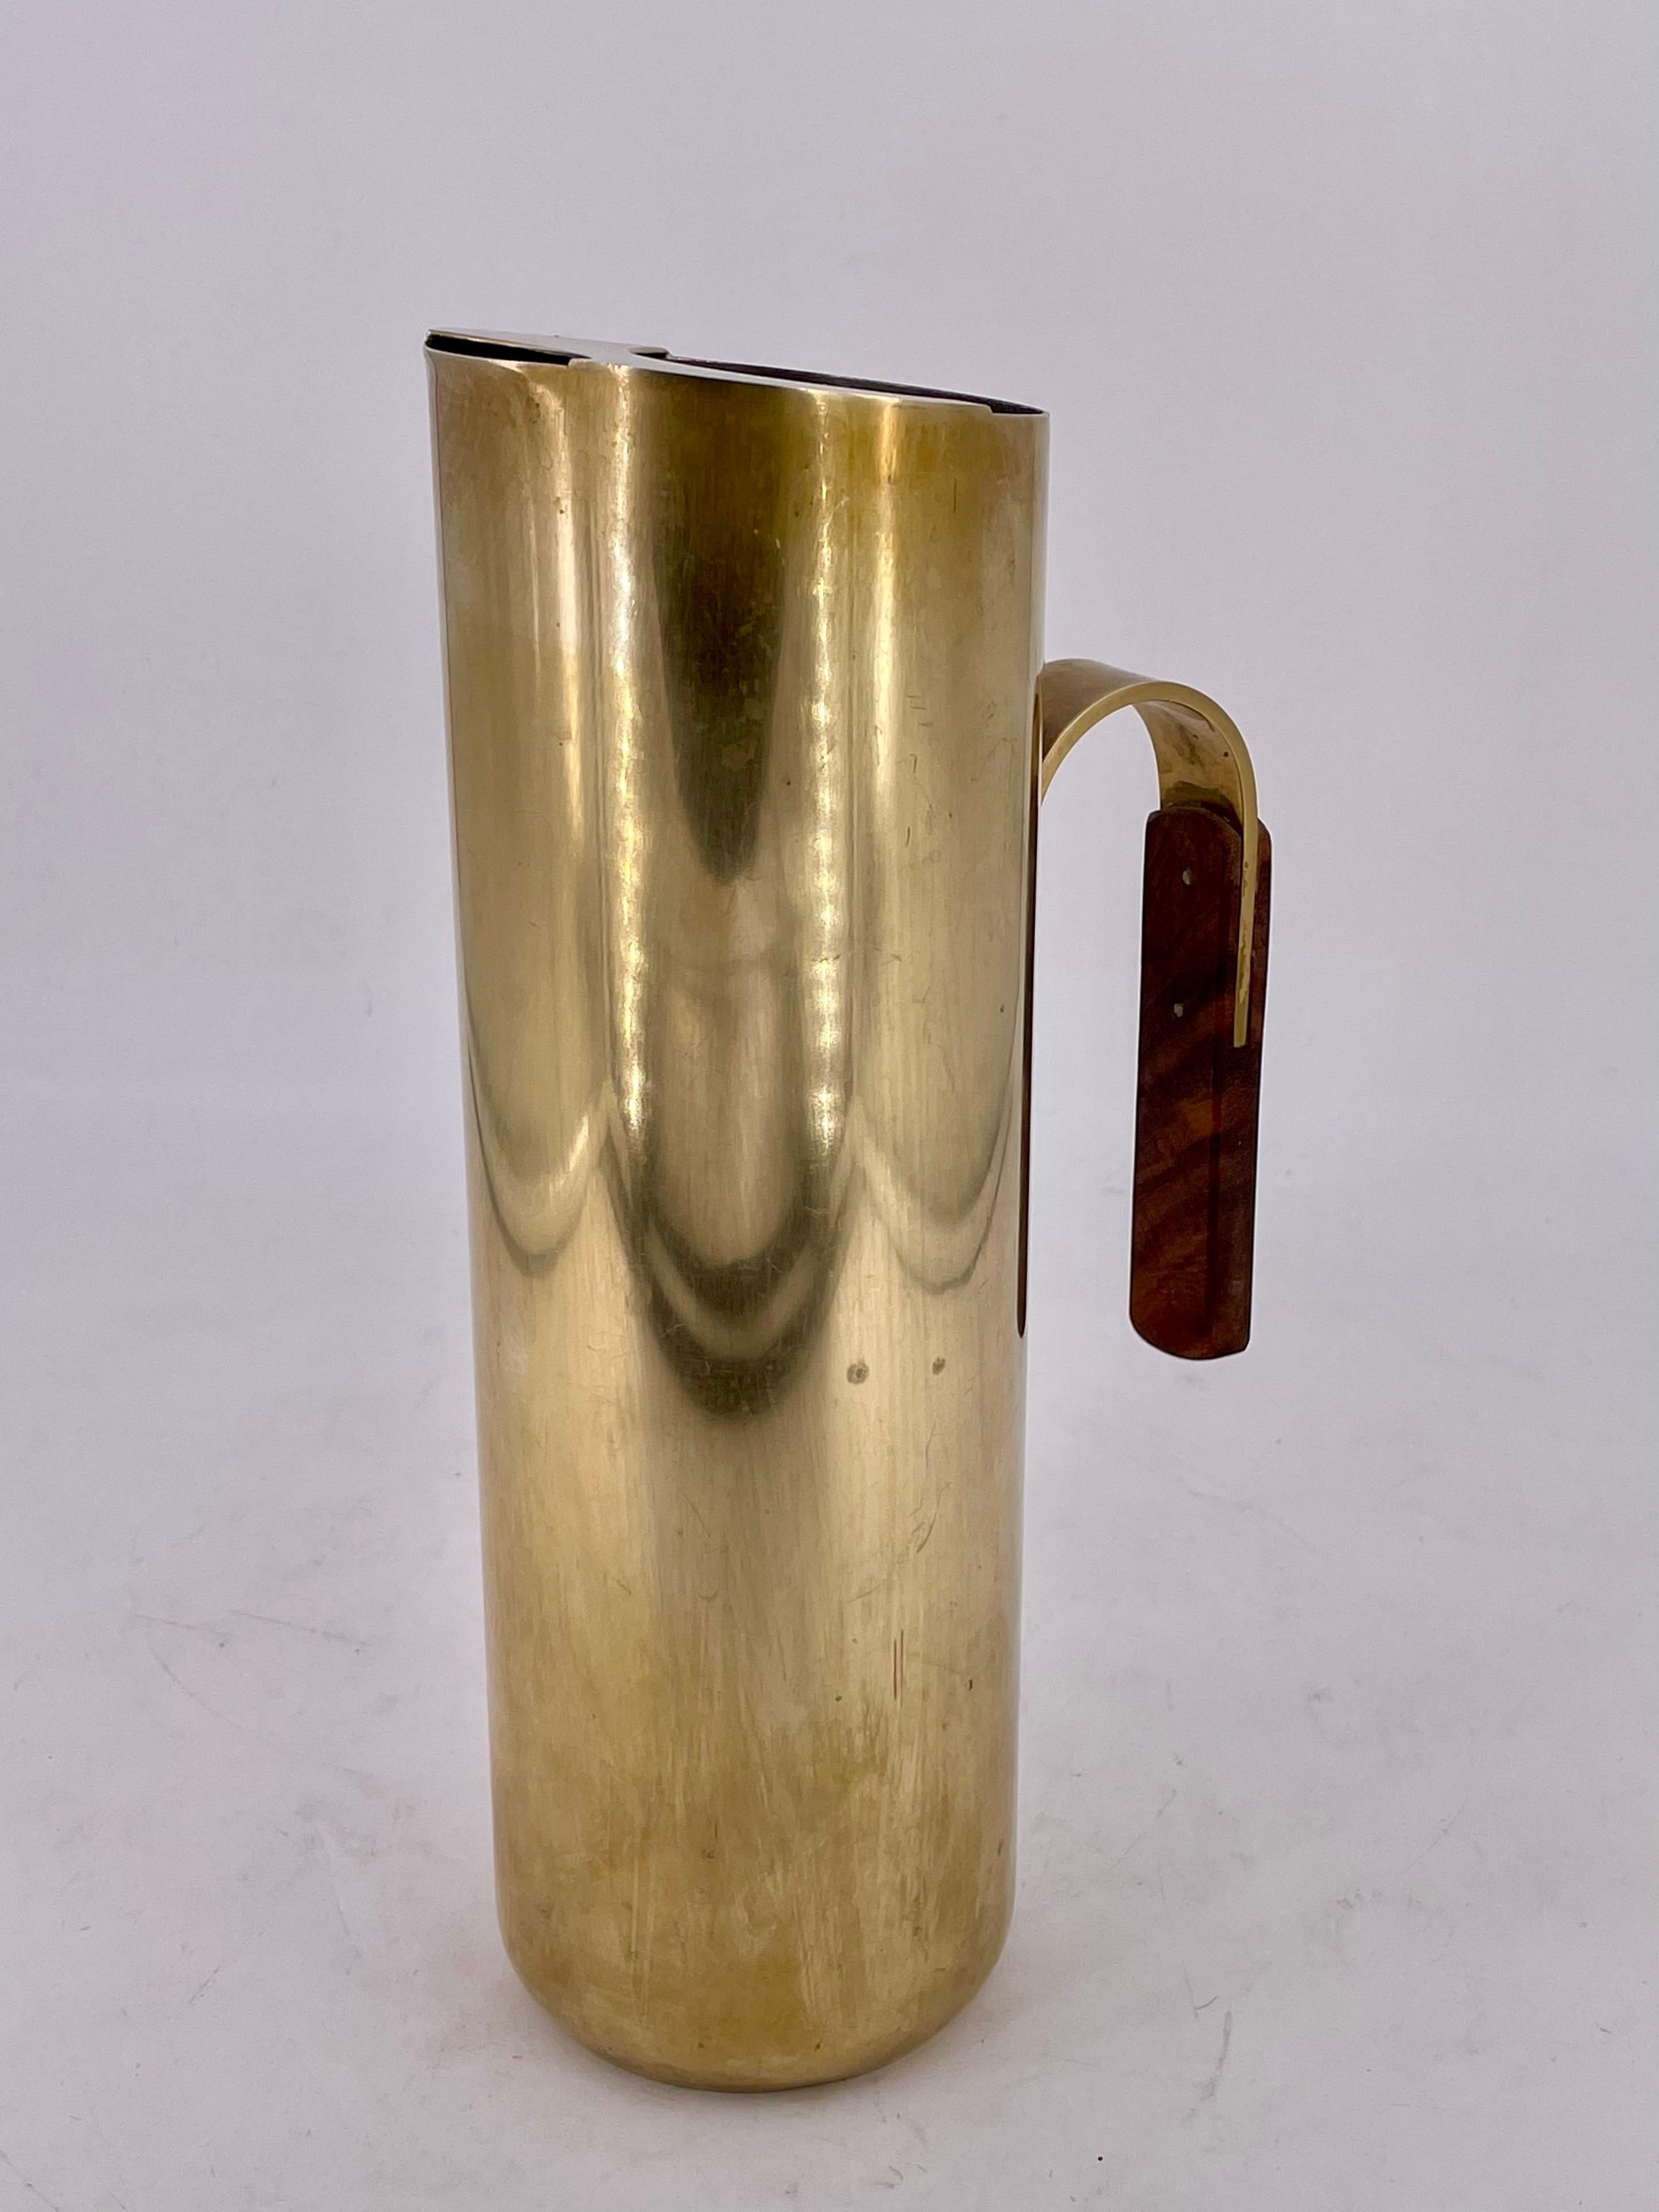 Polished brass Italian water pitcher circa 1950s, with silver lining and a rosewood handle circa 1950s, some patina tall unique and elegant piece stamped on the bottom made in Italy.